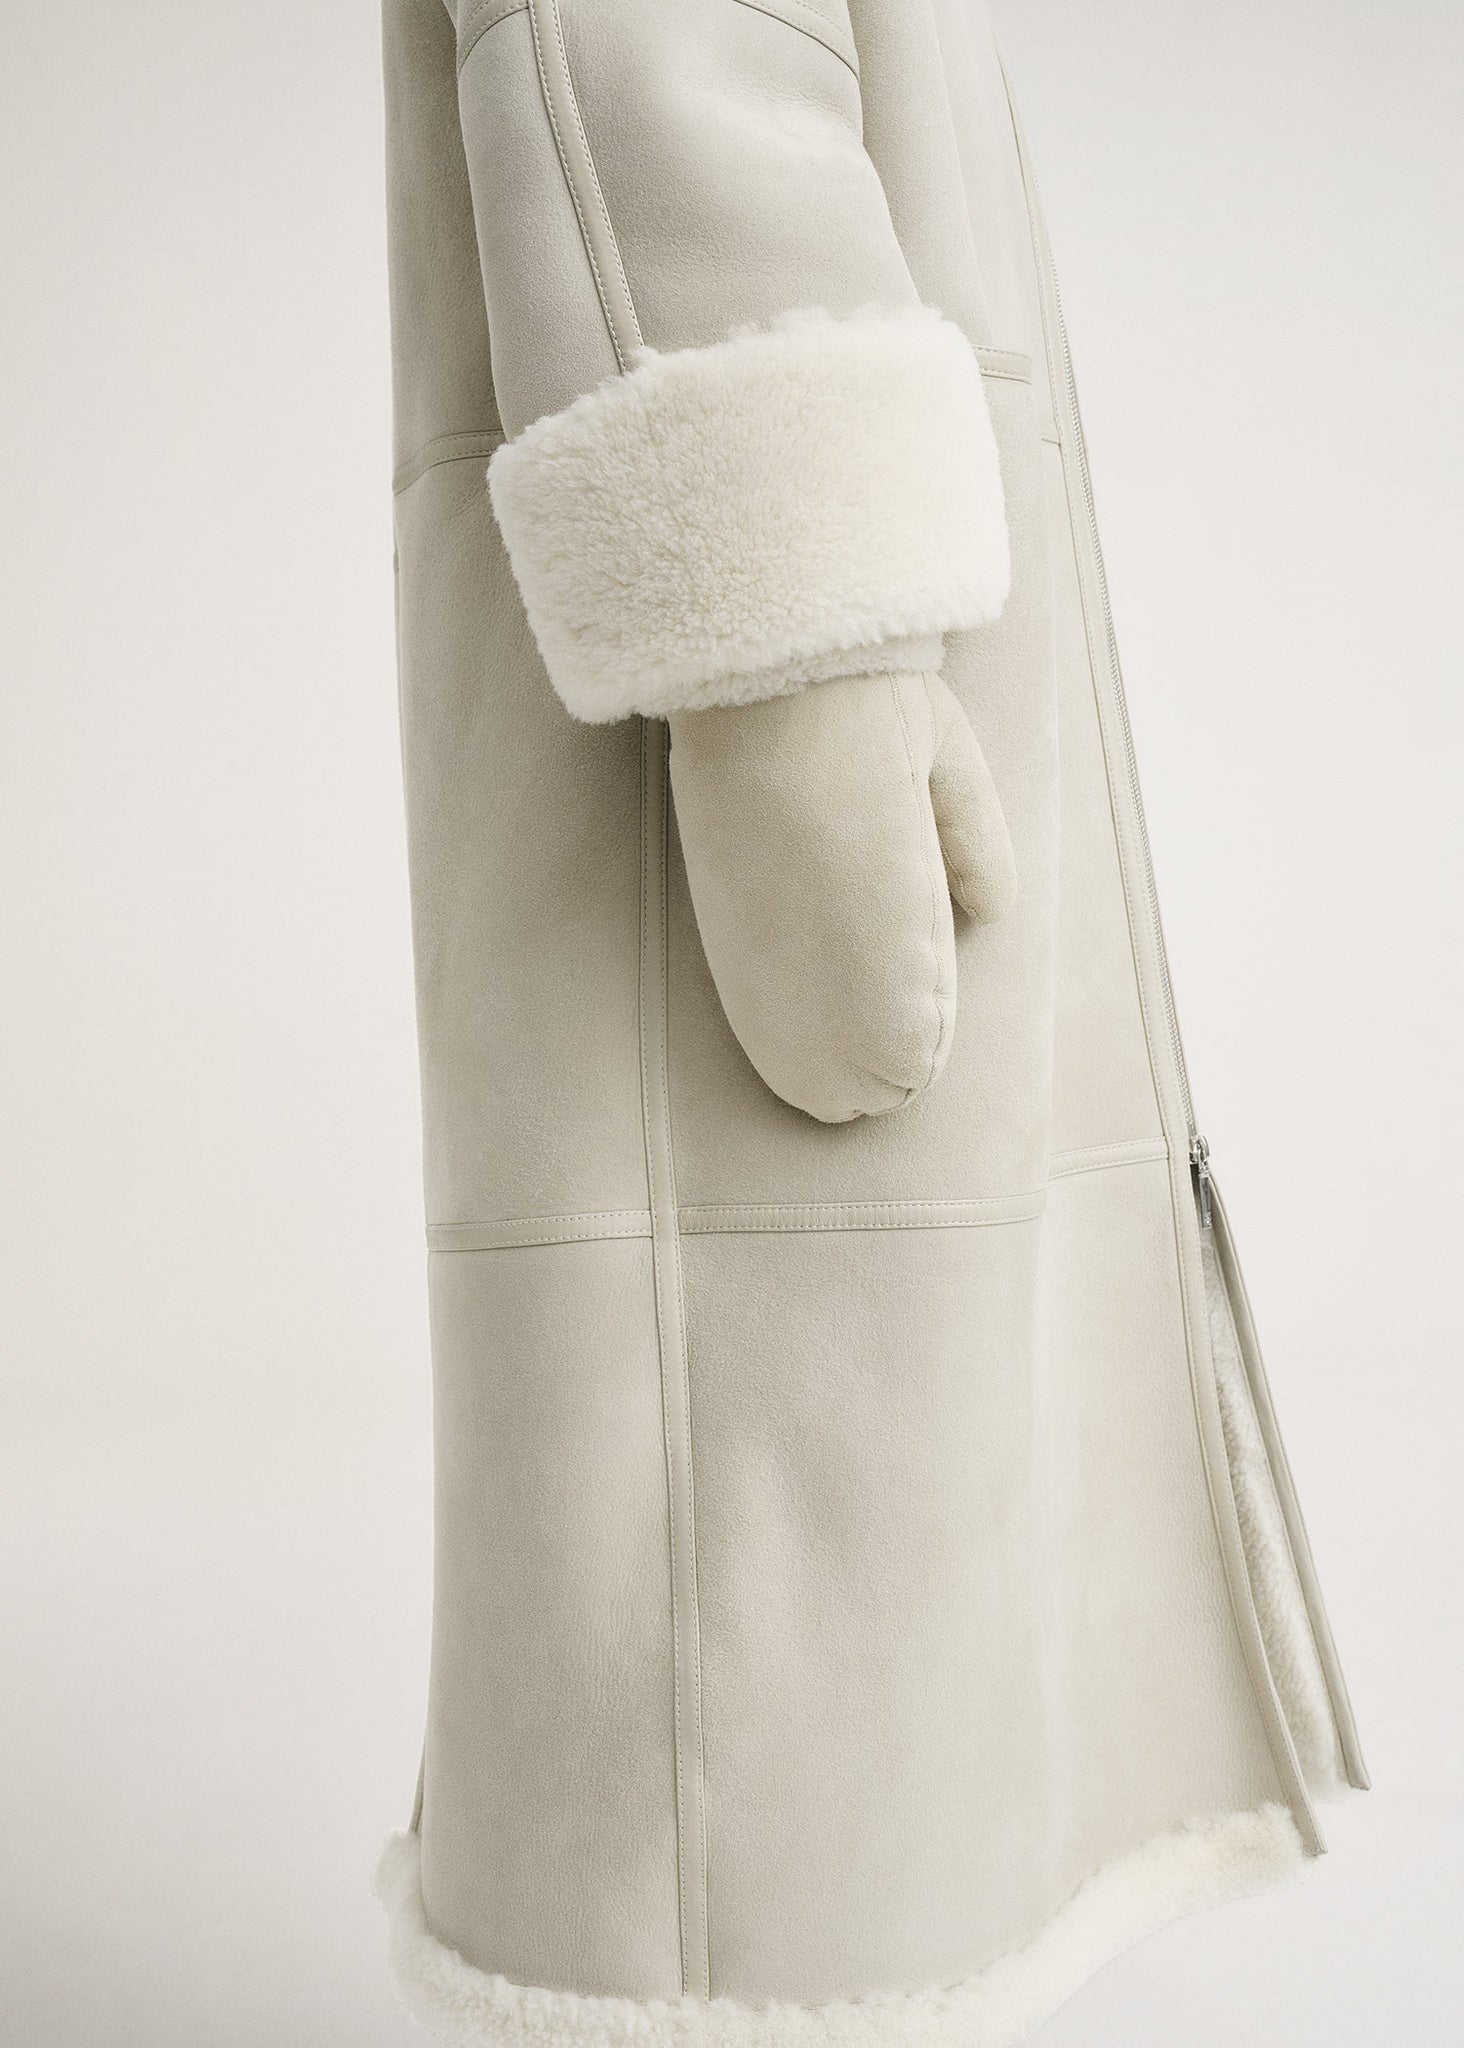 Suede shearling mittens macadamia